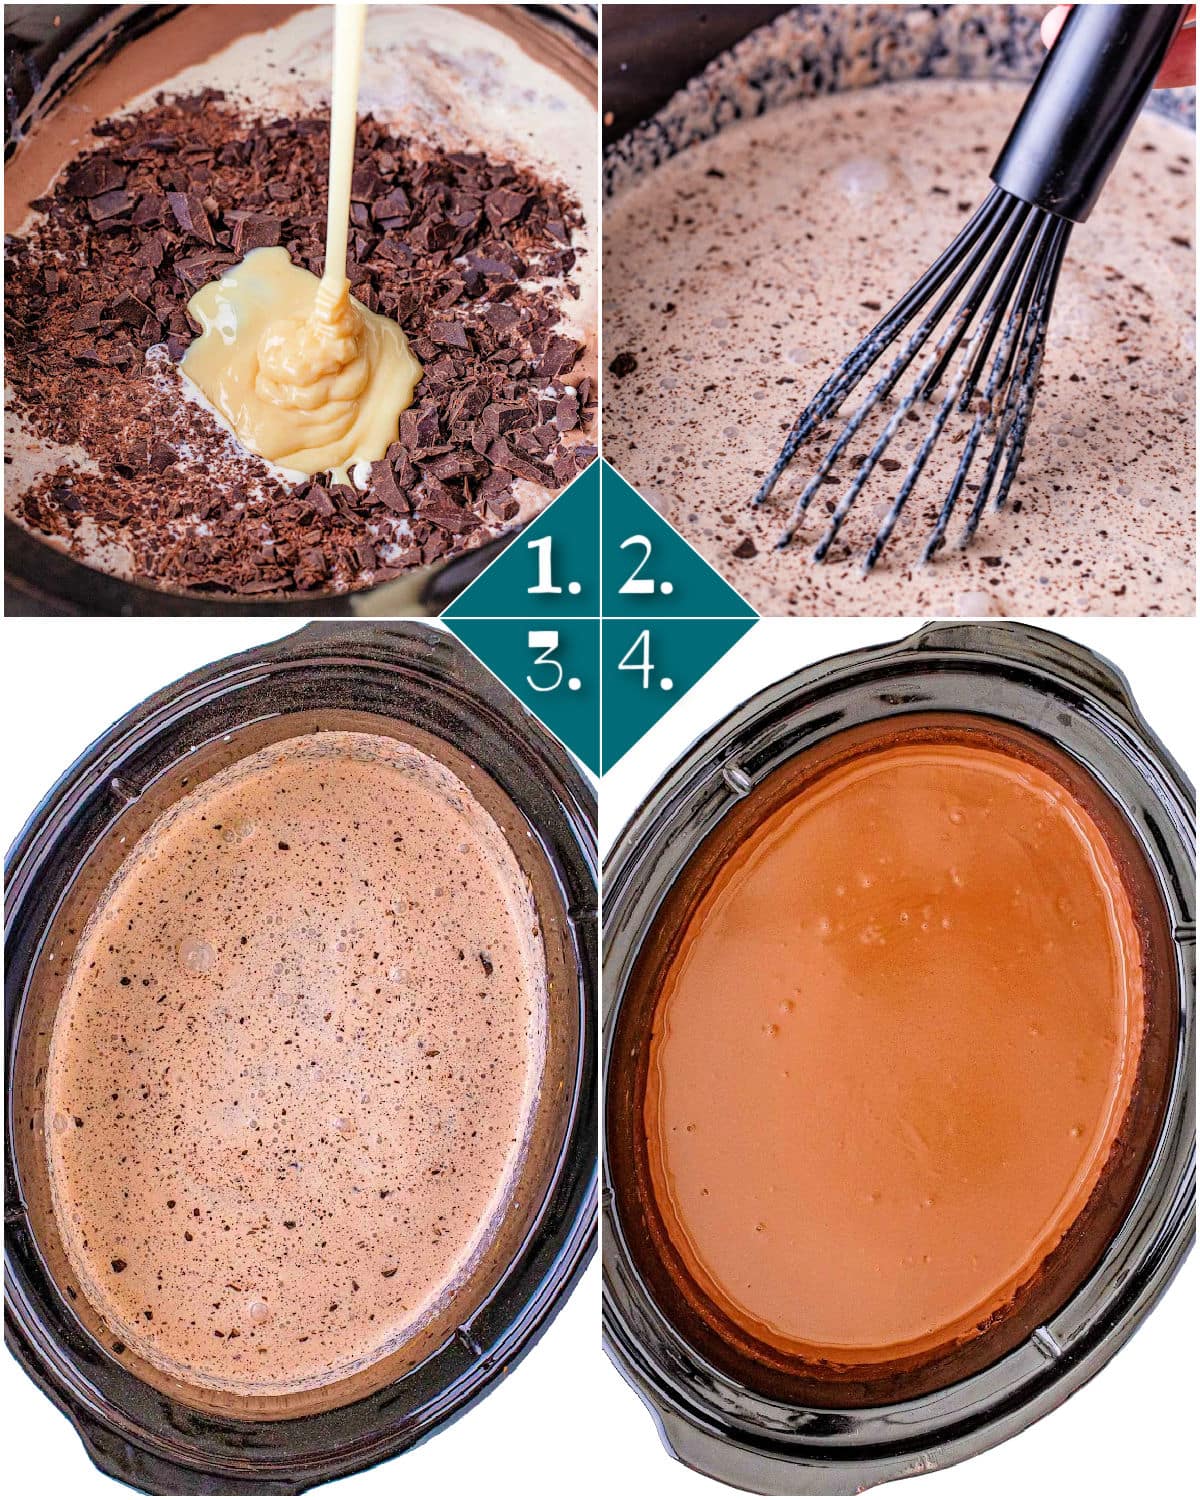 four image collage showing how to make crockpot hot chocolate step by step.